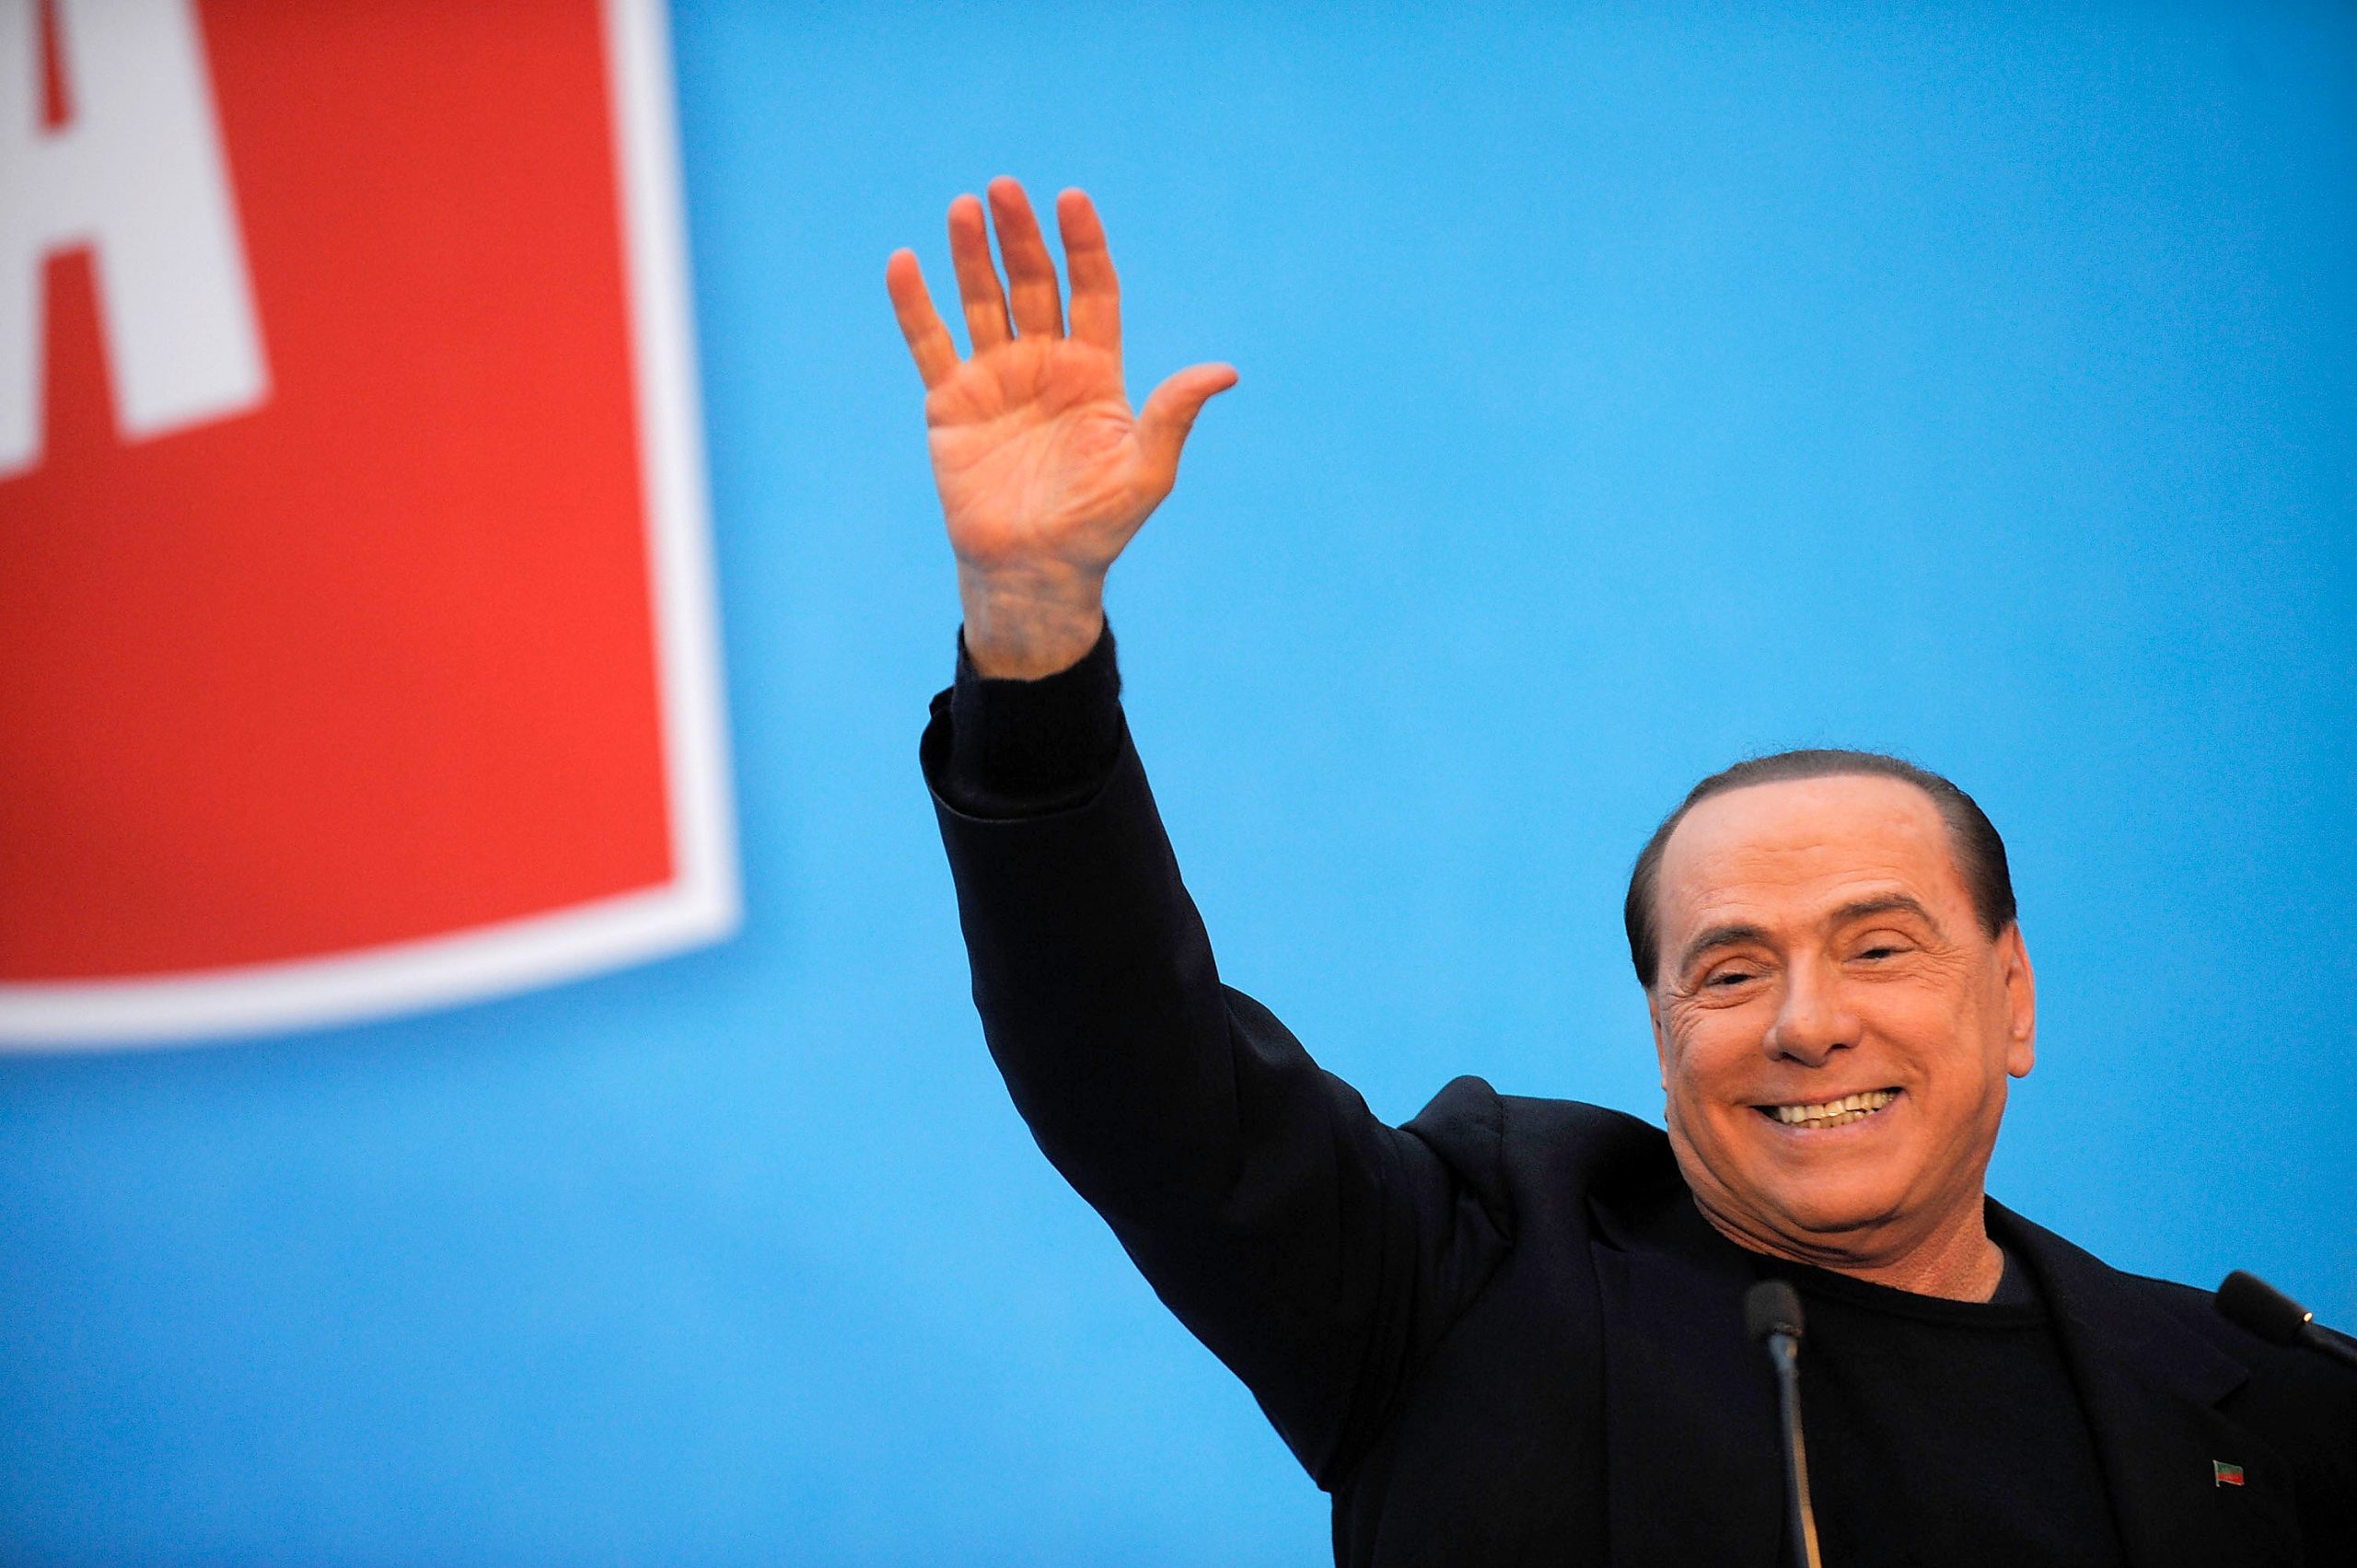 ROME, ITALY - NOVEMBER 27: Former Italian Prime Minister Silvio Berlusconi gestures as he attends a rally outside his house, Palazzo Grazioli, on November 27, 2013 in Rome, Italy. The Italian Senate has today voted to expel former Prime Minister Silvio Berlsuconi from parliament after his recent conviction over tax fraud.